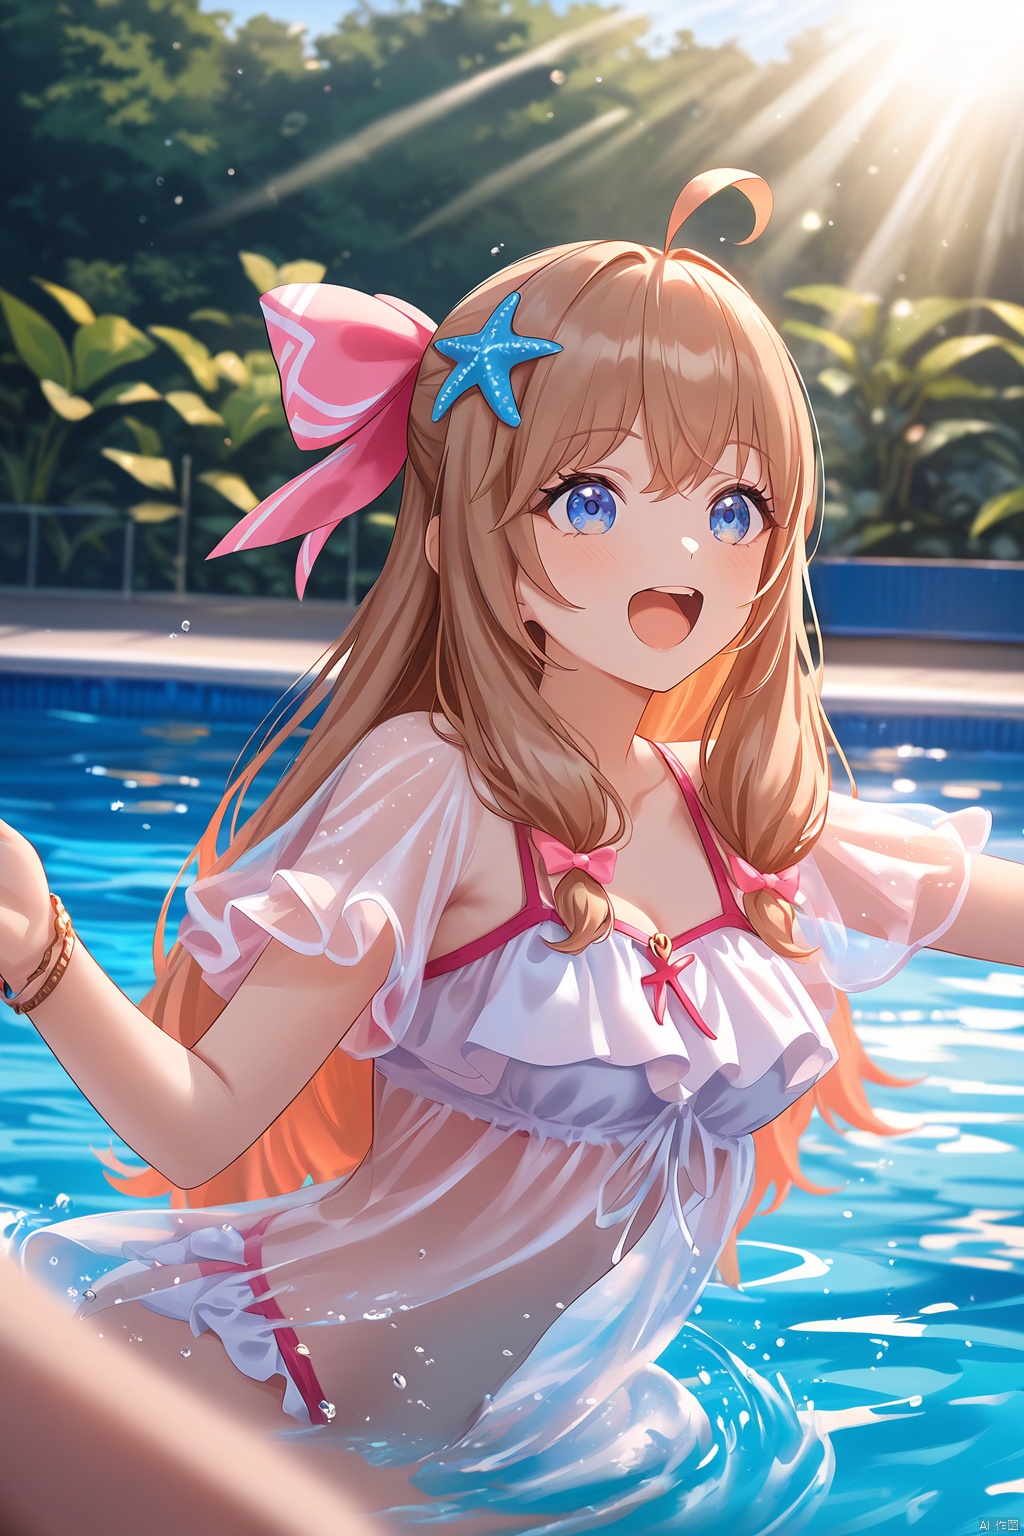 masterpiece,best quality,amazing quality,anime,anime color,1girl,swimsuit,blue eyes,long hair,brown hair,ahoge,pink hair bow,bracelet,starfish hair ornament,see-through,see-through sleeves,shortsleeves,Anime style, cinematic shot of a girl playing joyfully in a swimming pool, dynamic and energetic, with beautiful detailed eyes, sun-kissed skin, surrounded by the cool blue water of the pool, splashing water with a sense of fun, bright sunlight casting a warm glow, tropical plants adding to the lively setting, (best quality, 4k, 8k, highres, masterpiece:1.2), ultra-detailed, realistic, , vibrant colors, sharp focus, dynamic lighting, high contrast, anime portraits, outdoor summer scene, cheerful mood, youthful energy, clear water with sparkling reflections, playful water splashes, sunny and bright anime art, cinematic composition, film grain, depth of field, (happy:1.1), (joyful:1.1), (carefree:1.1), (youthful:1.1), (swimming pool:1.3), (sunlight:1.3), (anime vibrant:1.2), (colorful:1.2), (anime realism:1.2), (anime high-definition:1.2), (anime joyful expression:1.2), (cinematic lighting:1.3), (filmic look:1.3)